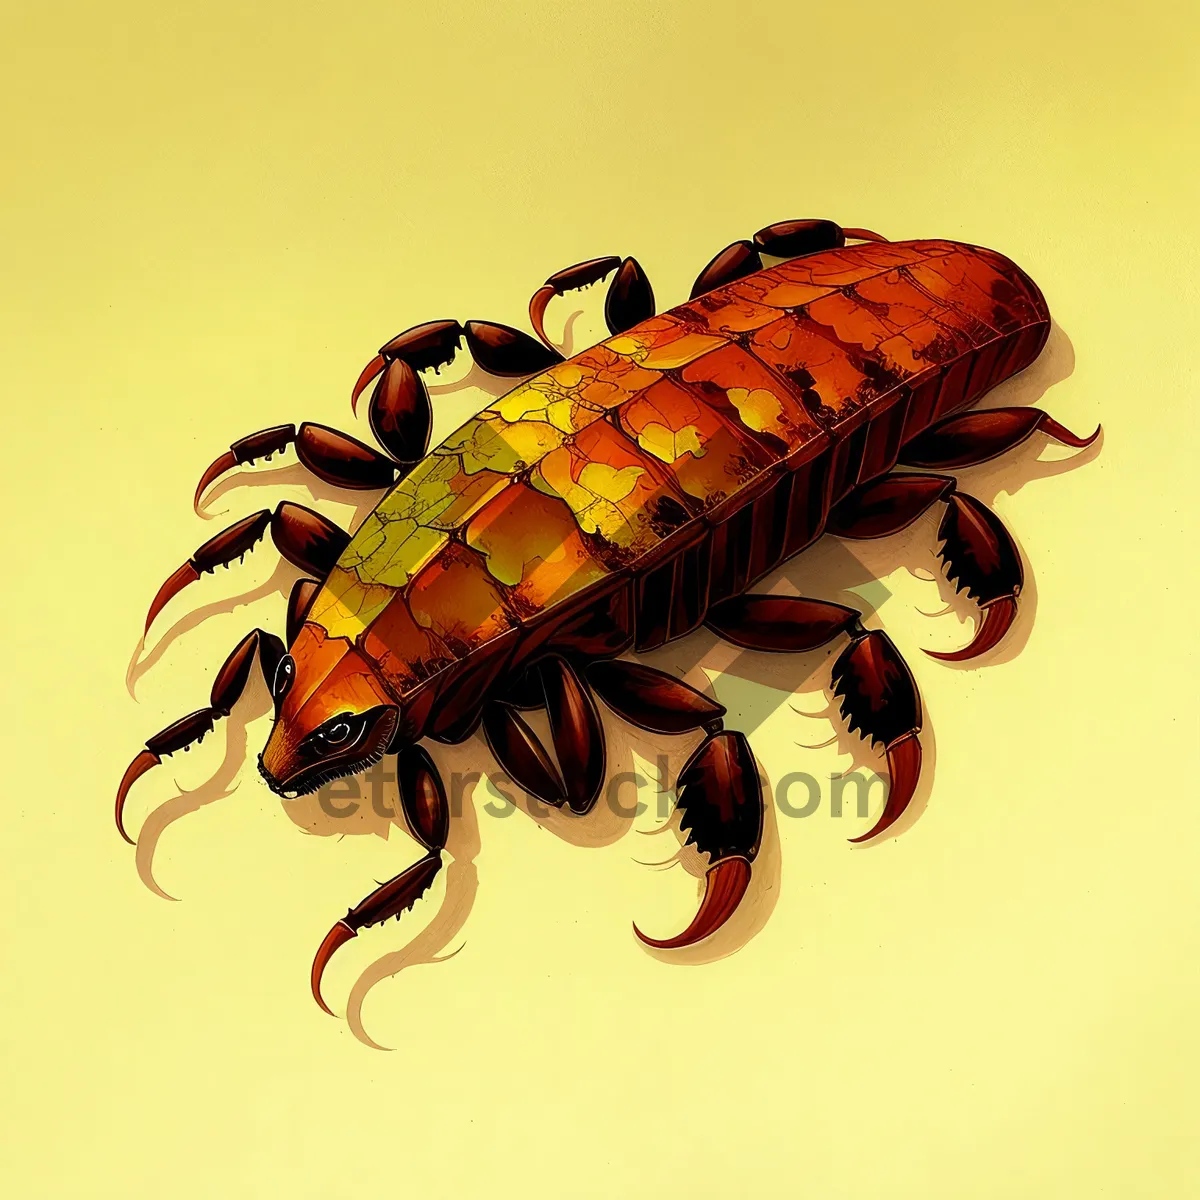 Picture of Cockroach close-up: A delectable crustacean dish!